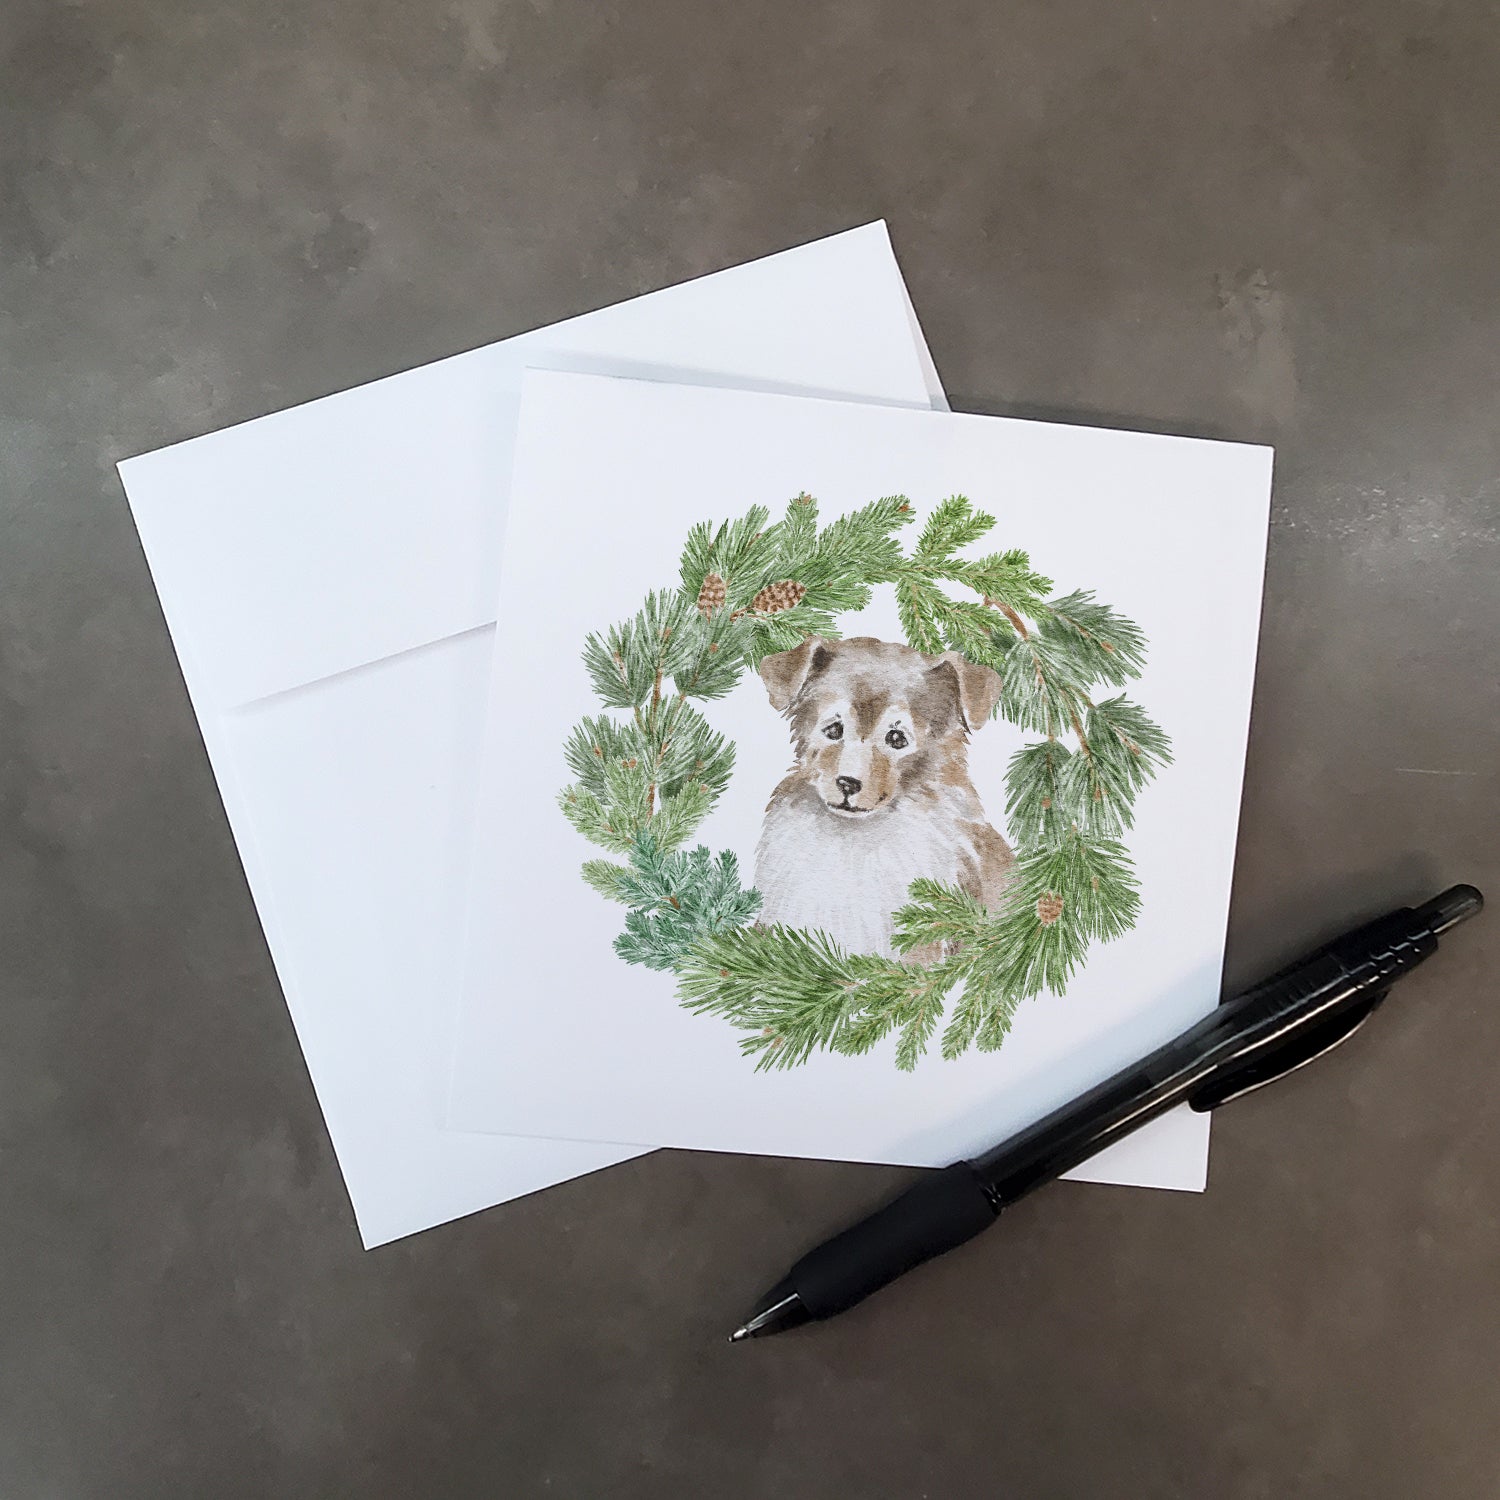 Sheltie/Shetland Sheepdog Puppy Sable Smile with Christmas Wreath Square Greeting Cards and Envelopes Pack of 8 - the-store.com